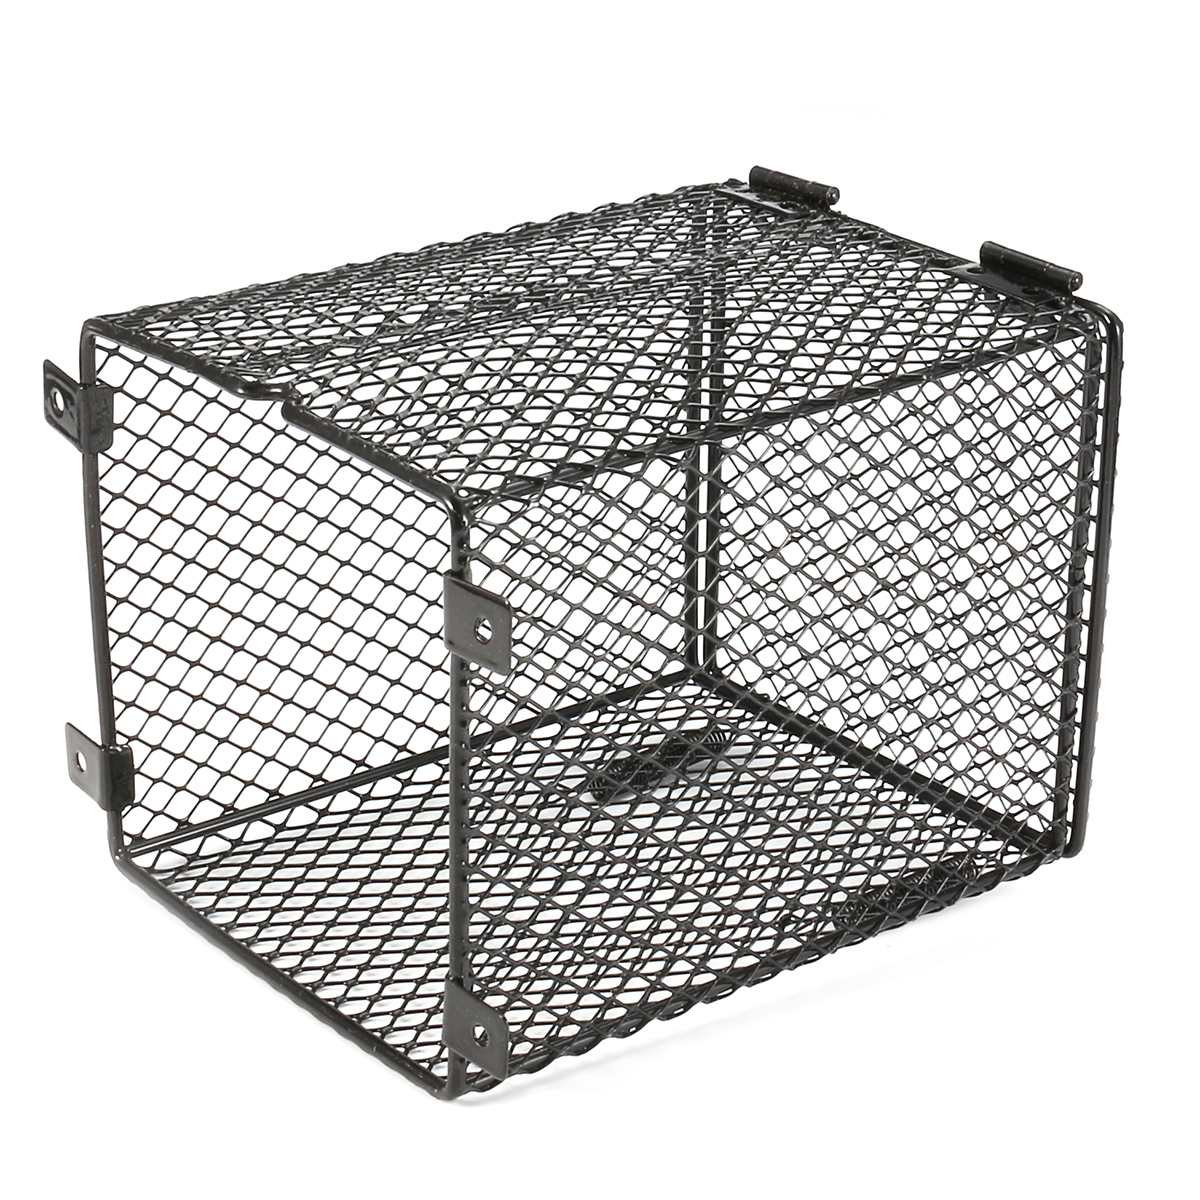 Reptile-Basking-Lamp-Guard-Mesh-Cage-Light-Bulb-Protector-Enclosure-Heat-Safety-1220496